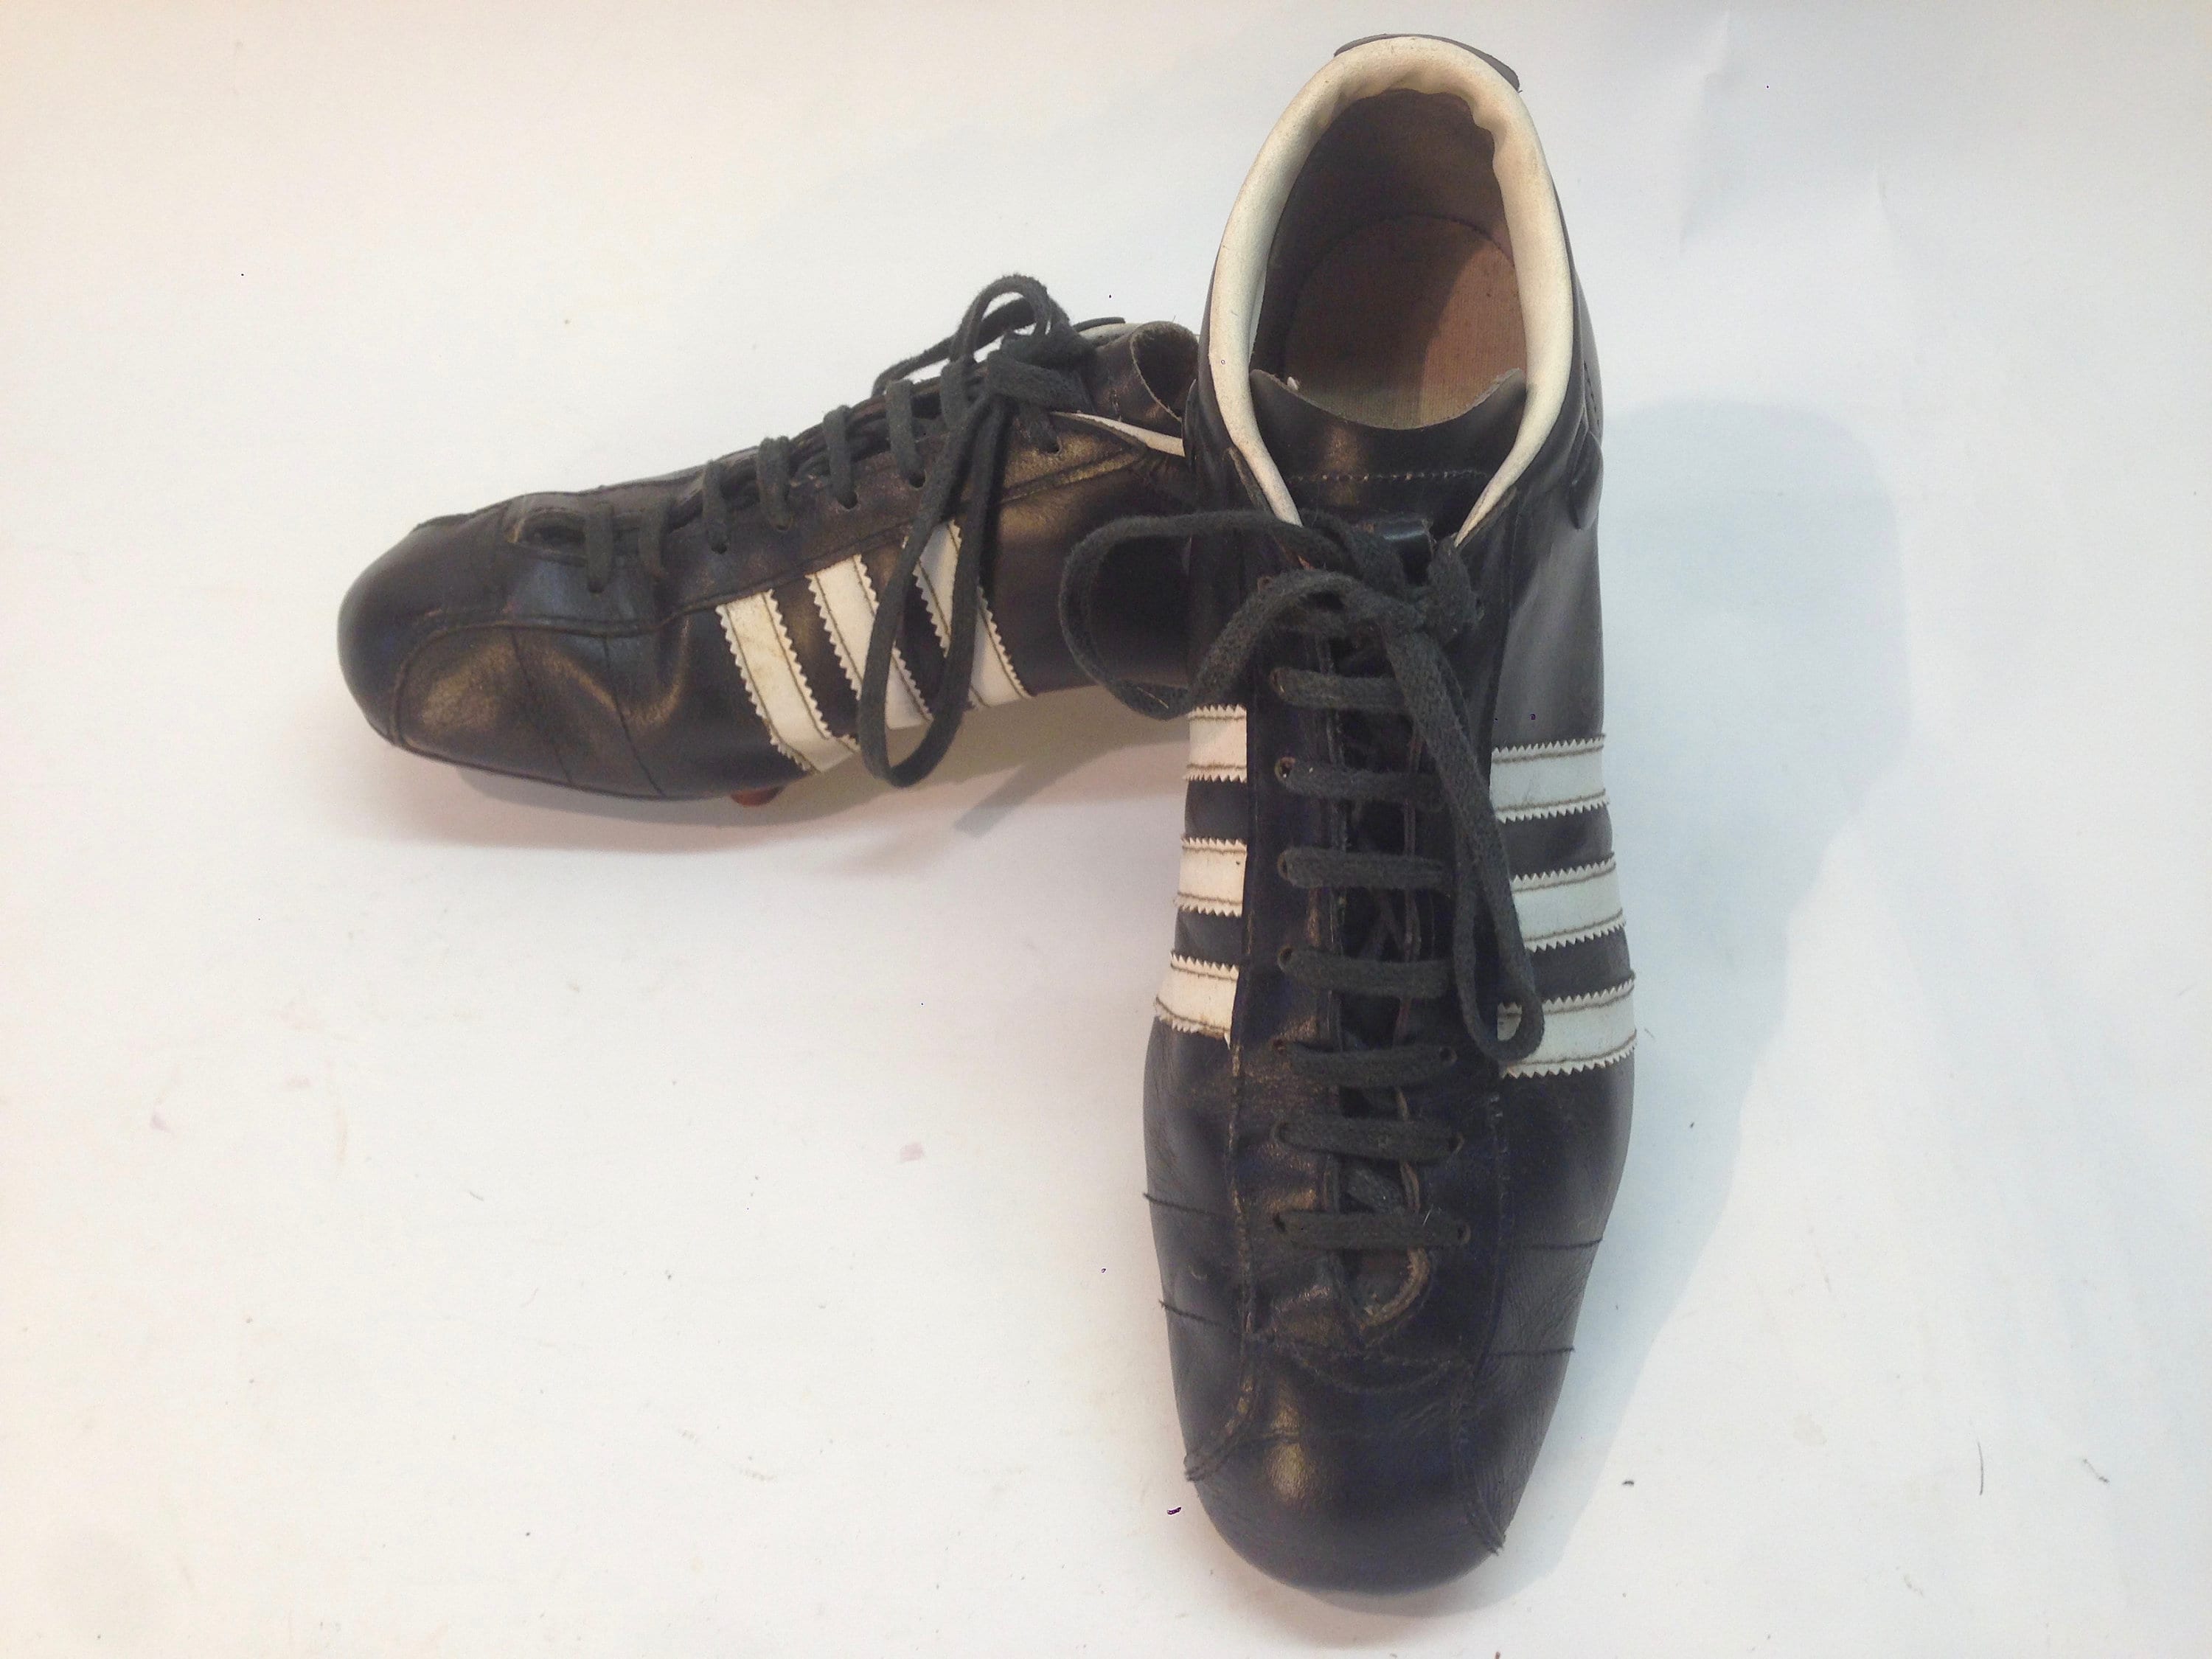 RESERVED: Adidas Santiago Vintage 1960s Football Boots - Etsy